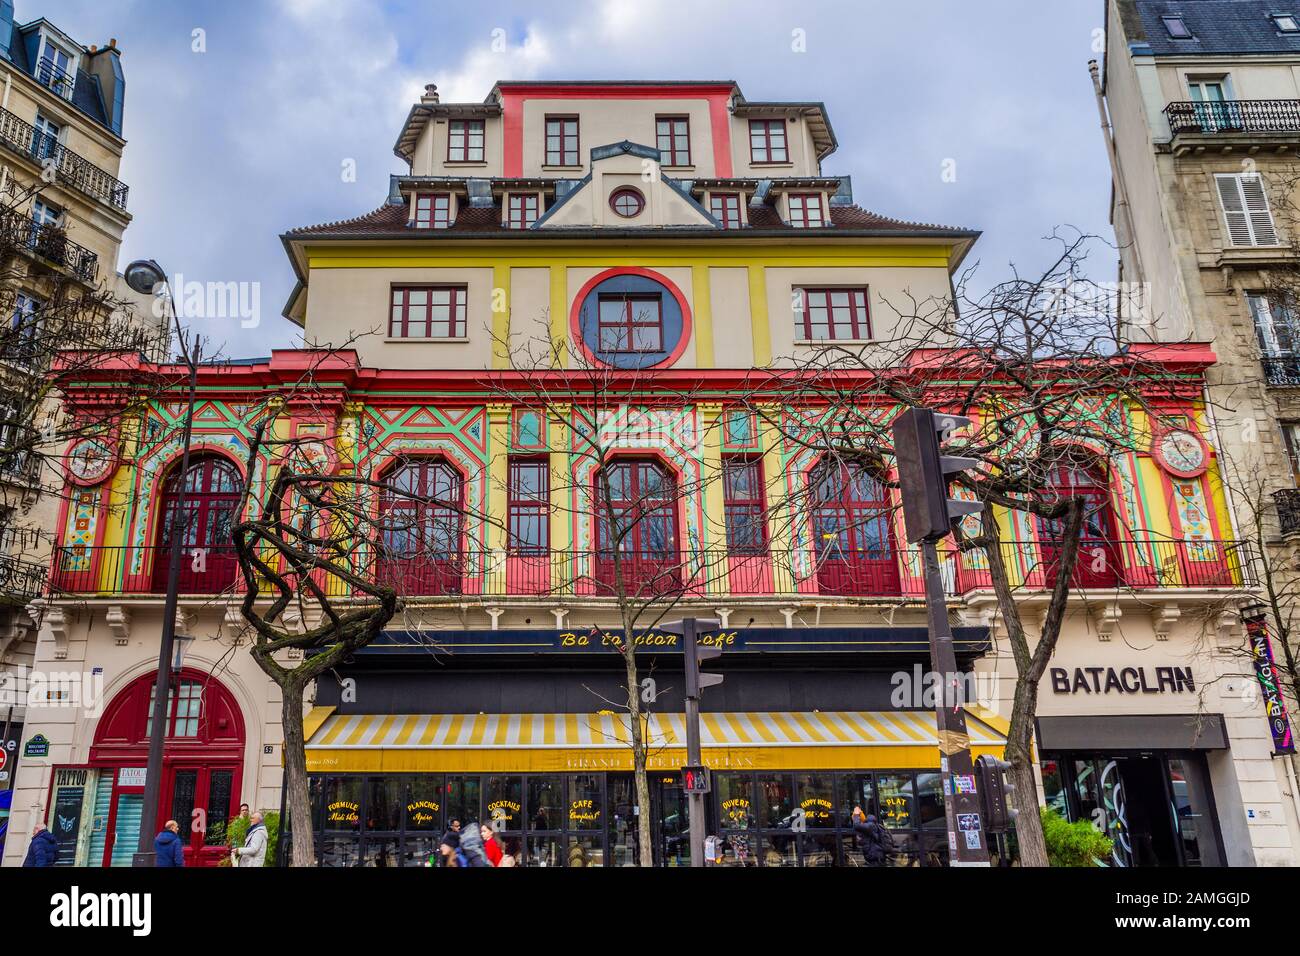 Exterior of the 'Chinoiserie style' Bataclan theatre, Boulevard Voltaire, Paris 75011, France. Stock Photo